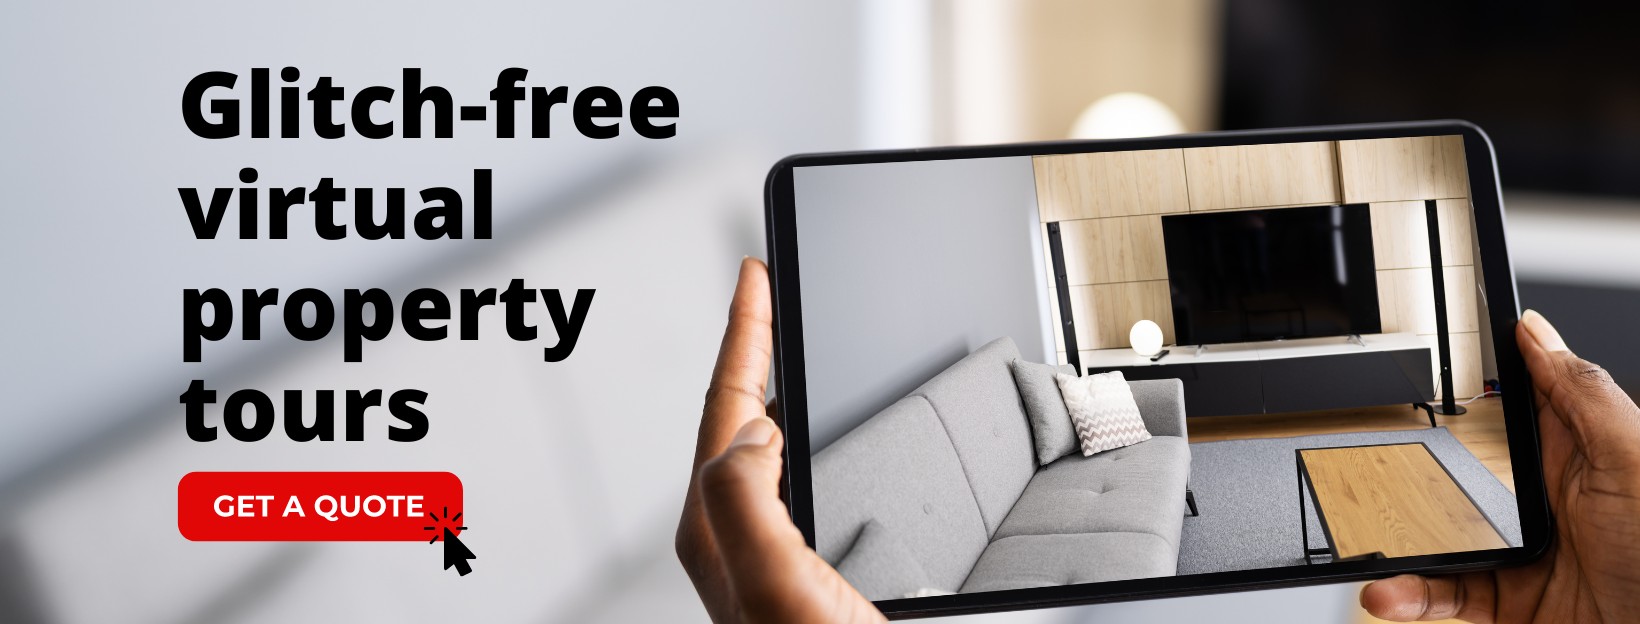 Glitch-free virtual property tours for Real Estate Agents